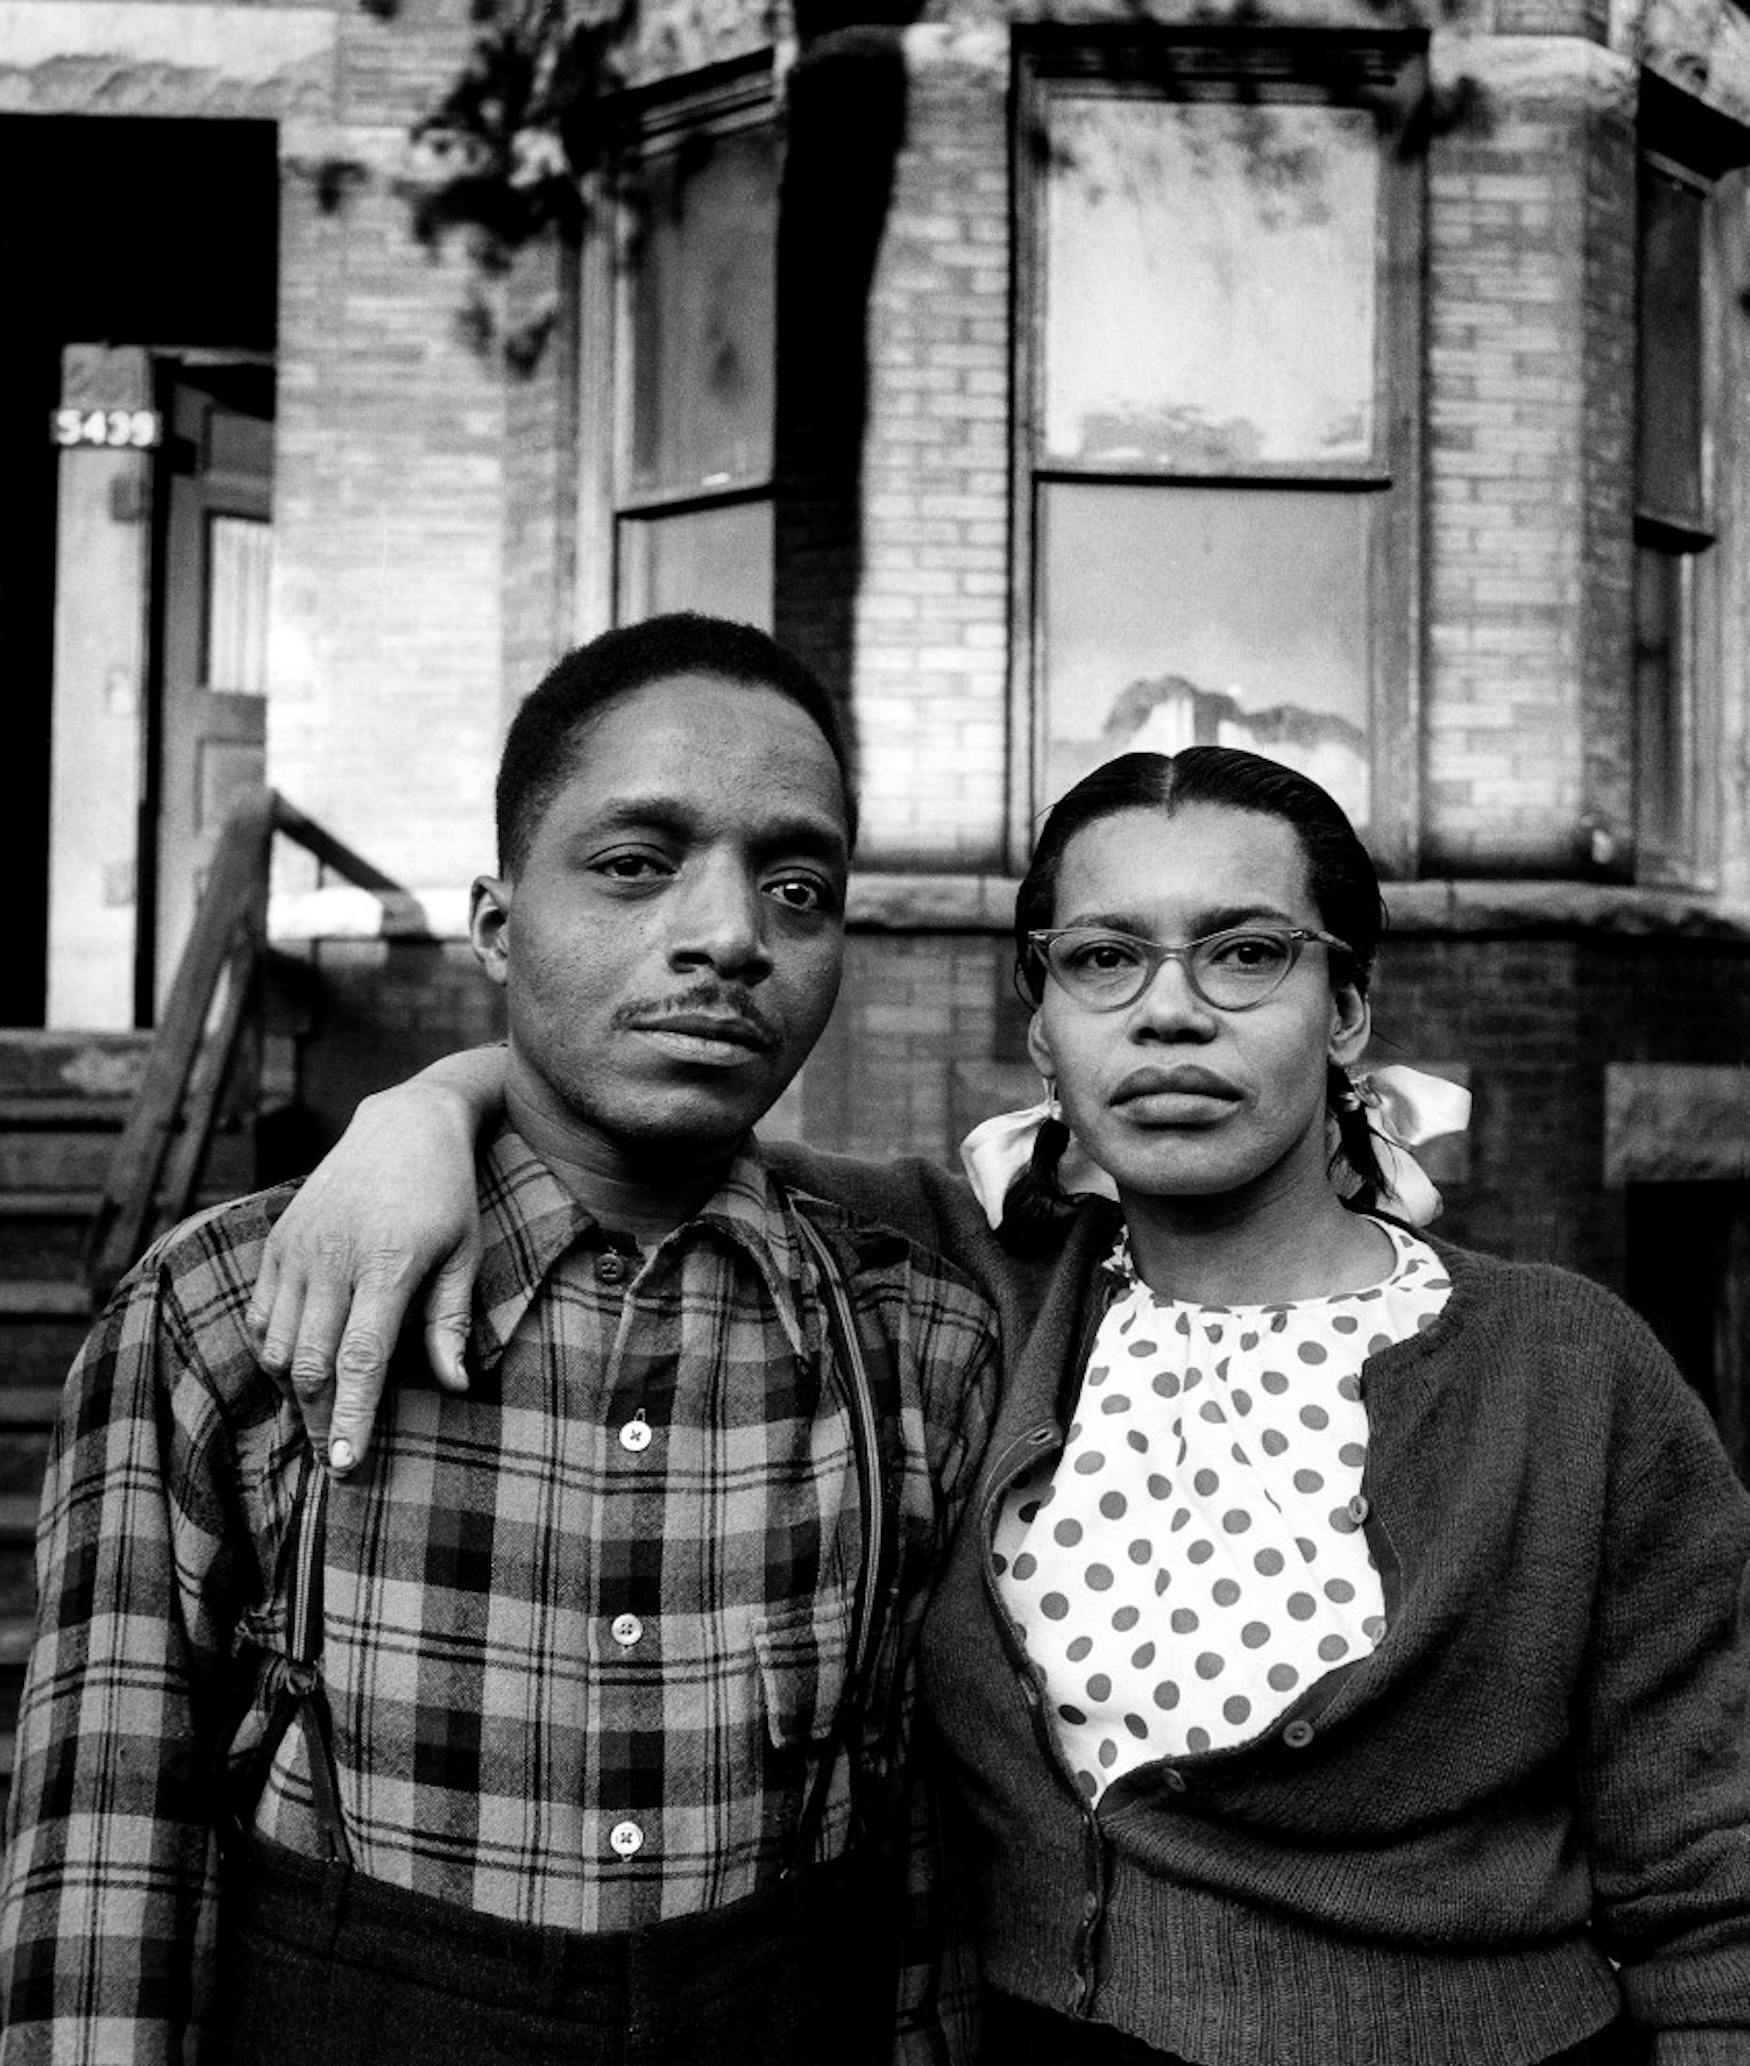 Untitled, Chicago, Illinois  
Gordon Parks (American, 1912–2006)
1950
Photograph, gelatin silver print
*Photograph by Gordon Parks. Courtesy and © The Gordon Parks Foundation
*Courtesy Museum of Fine Arts, Boston